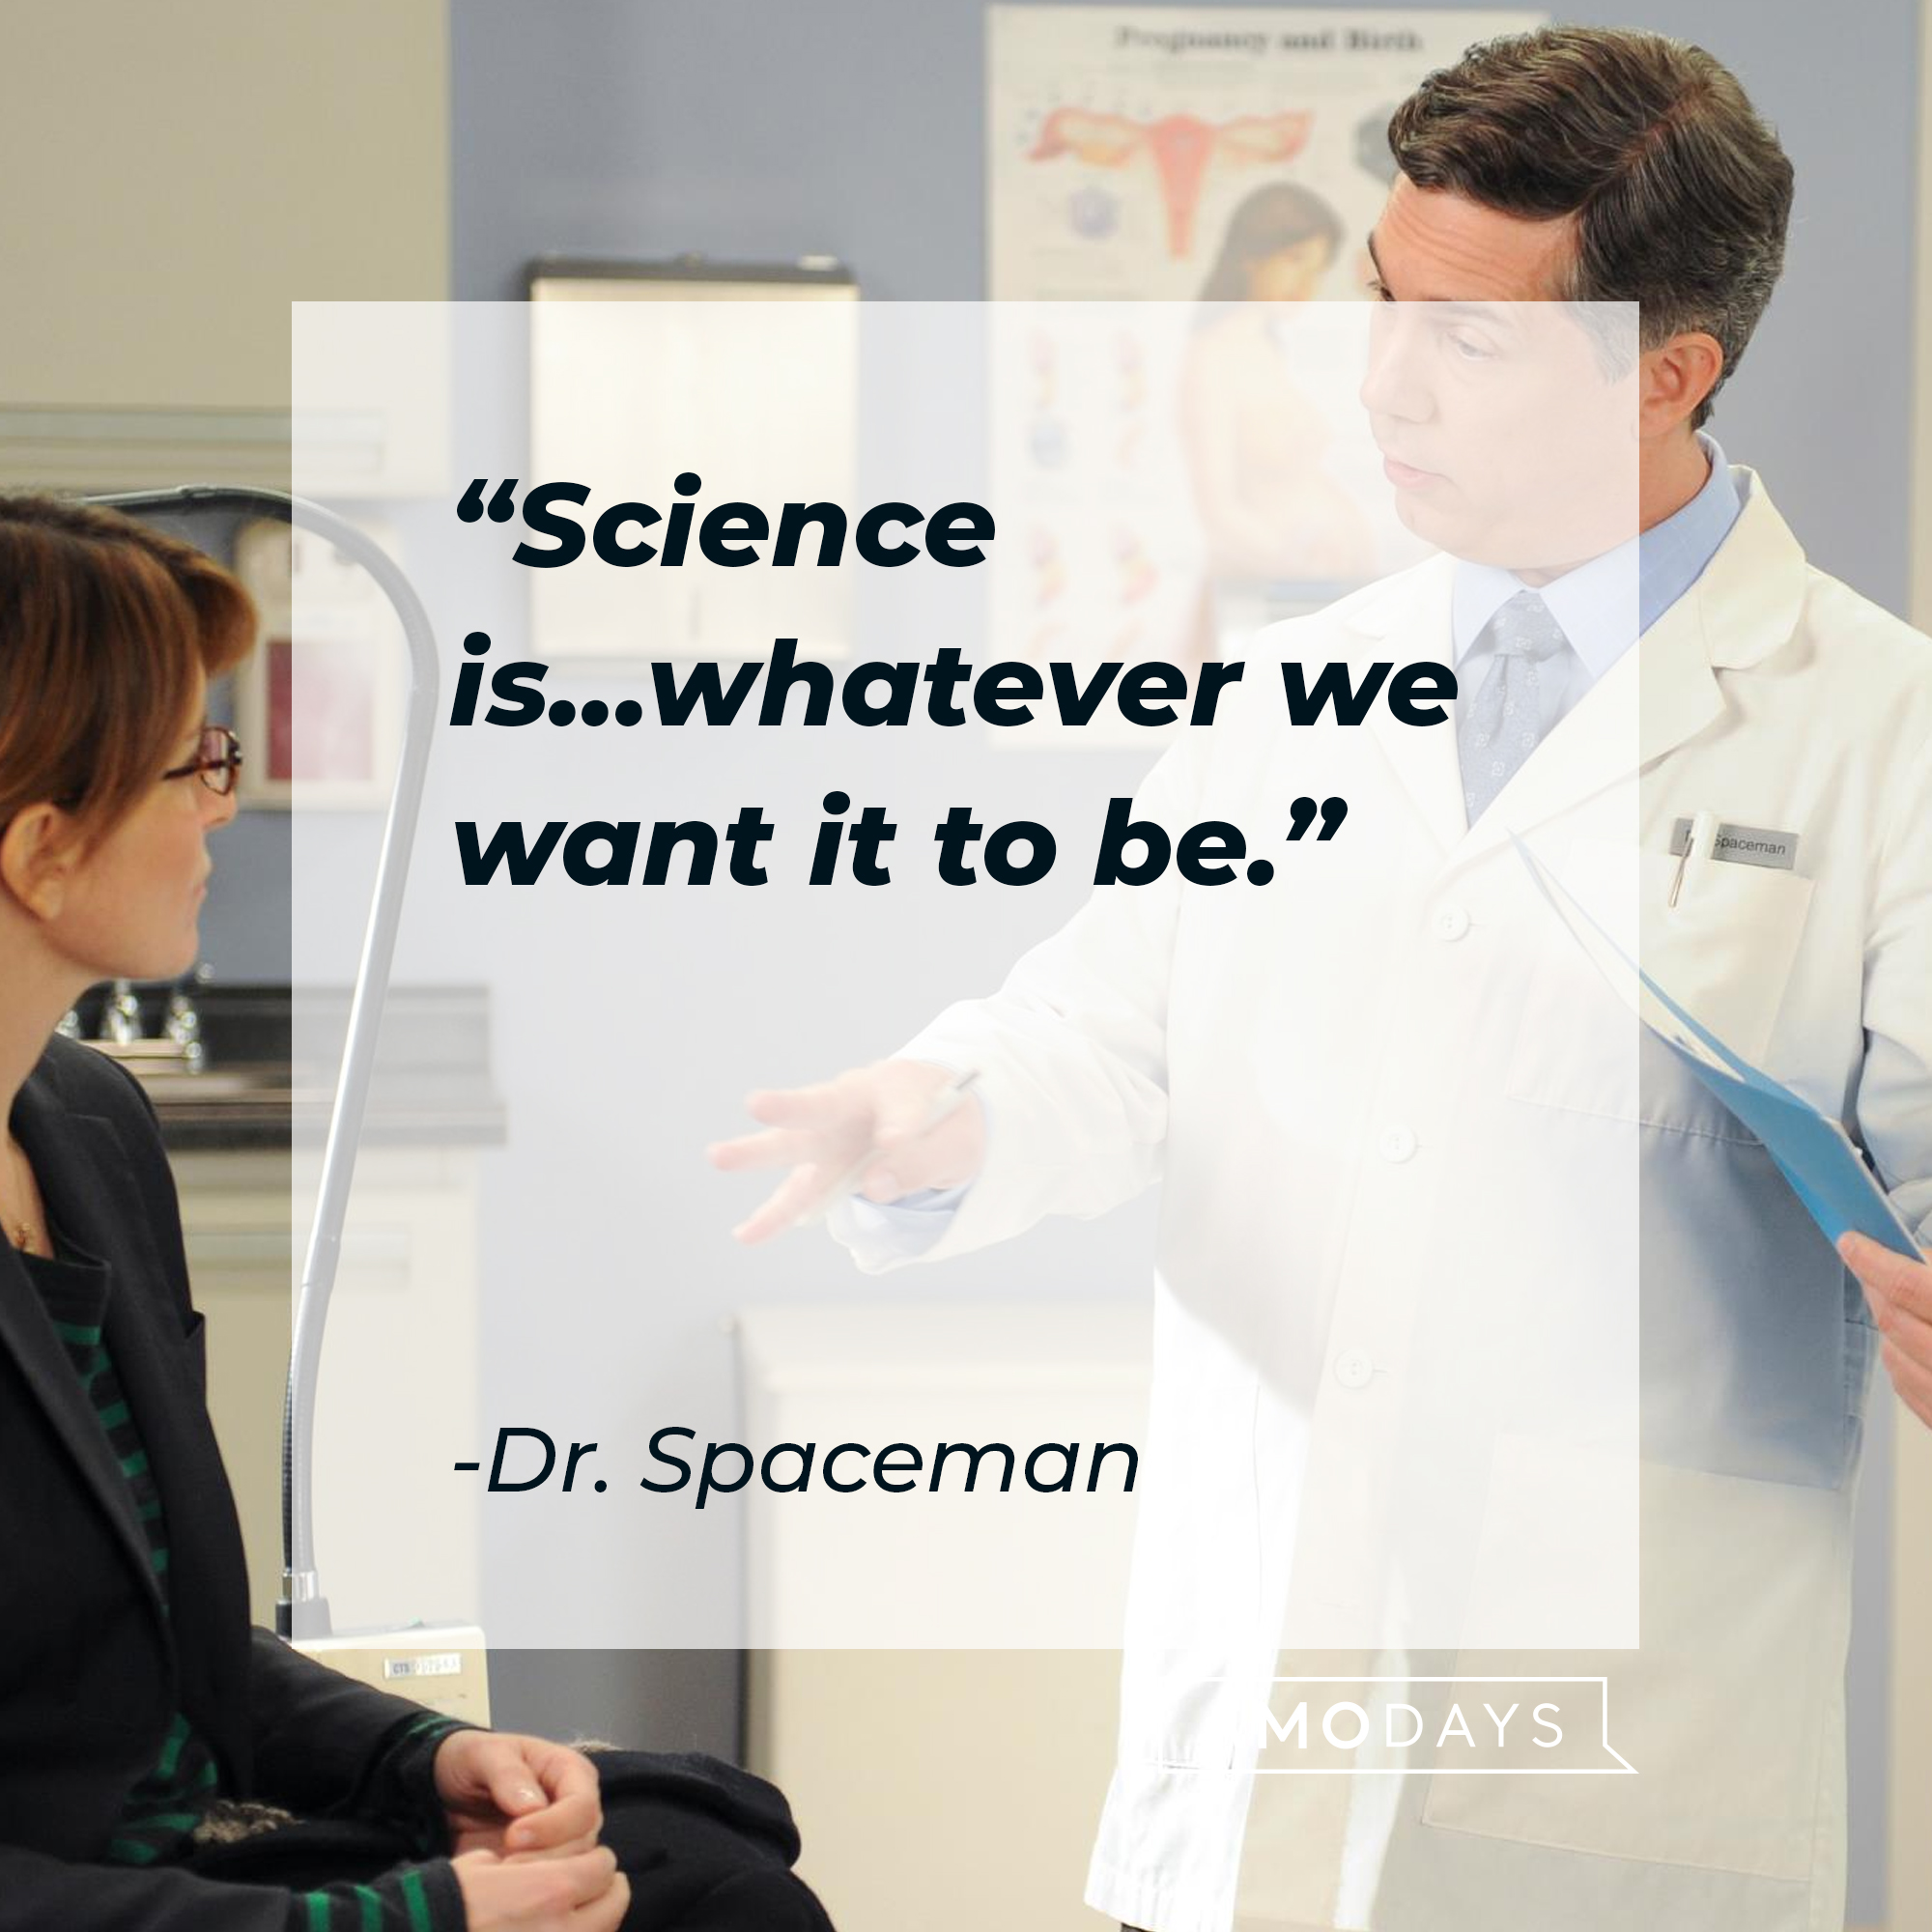 Dr. Spaceman's quote: “Science is...whatever we want it to be.” | Source: facebook.com/30RockTV